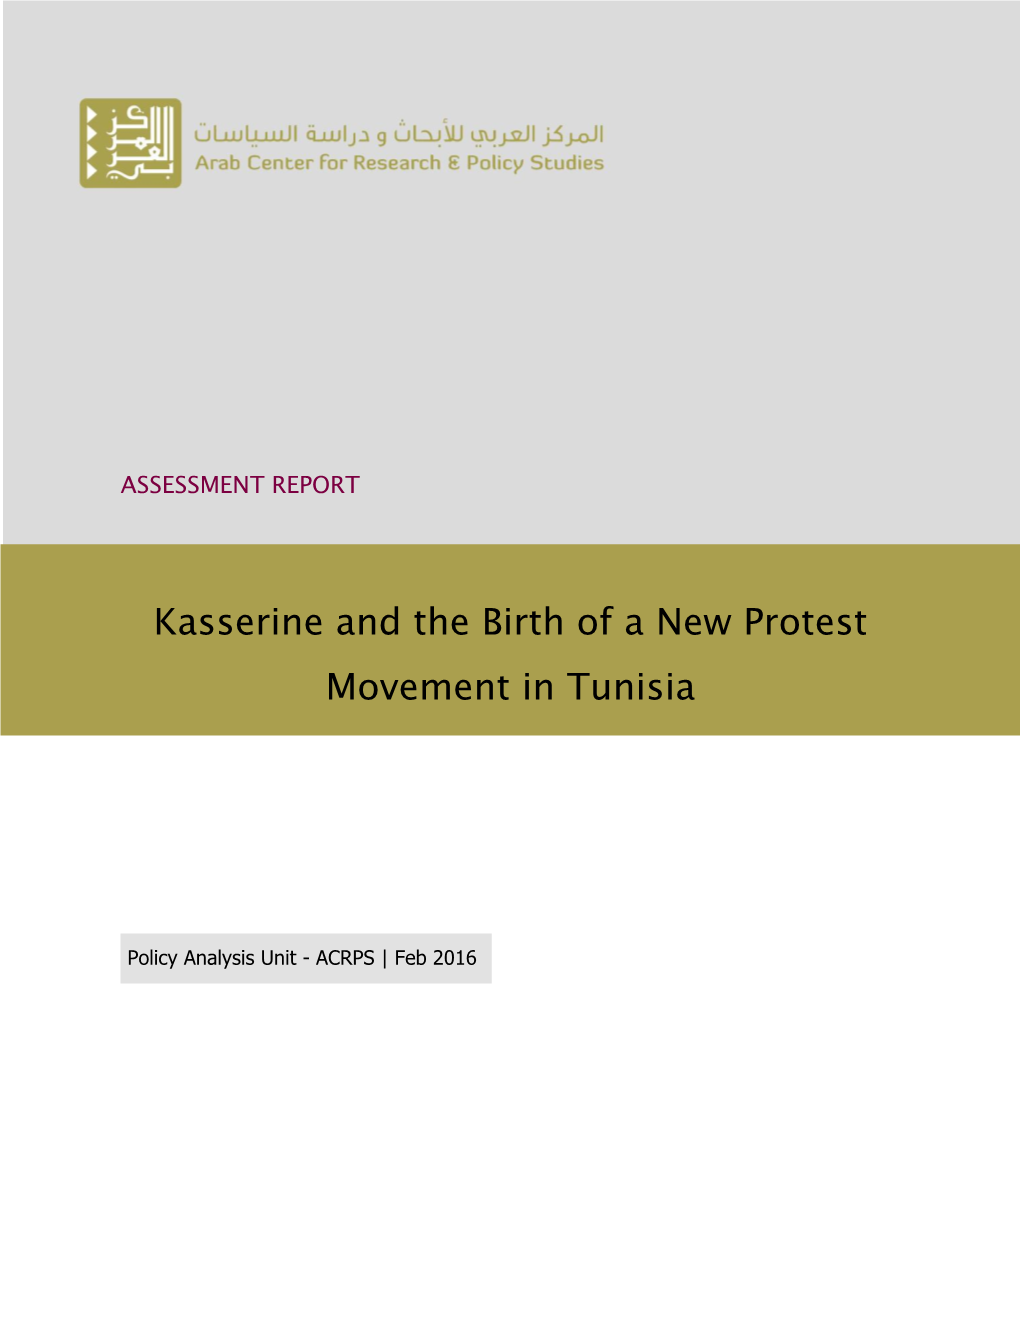 Kasserine and the Birth of a New Protest Movement in Tunisia